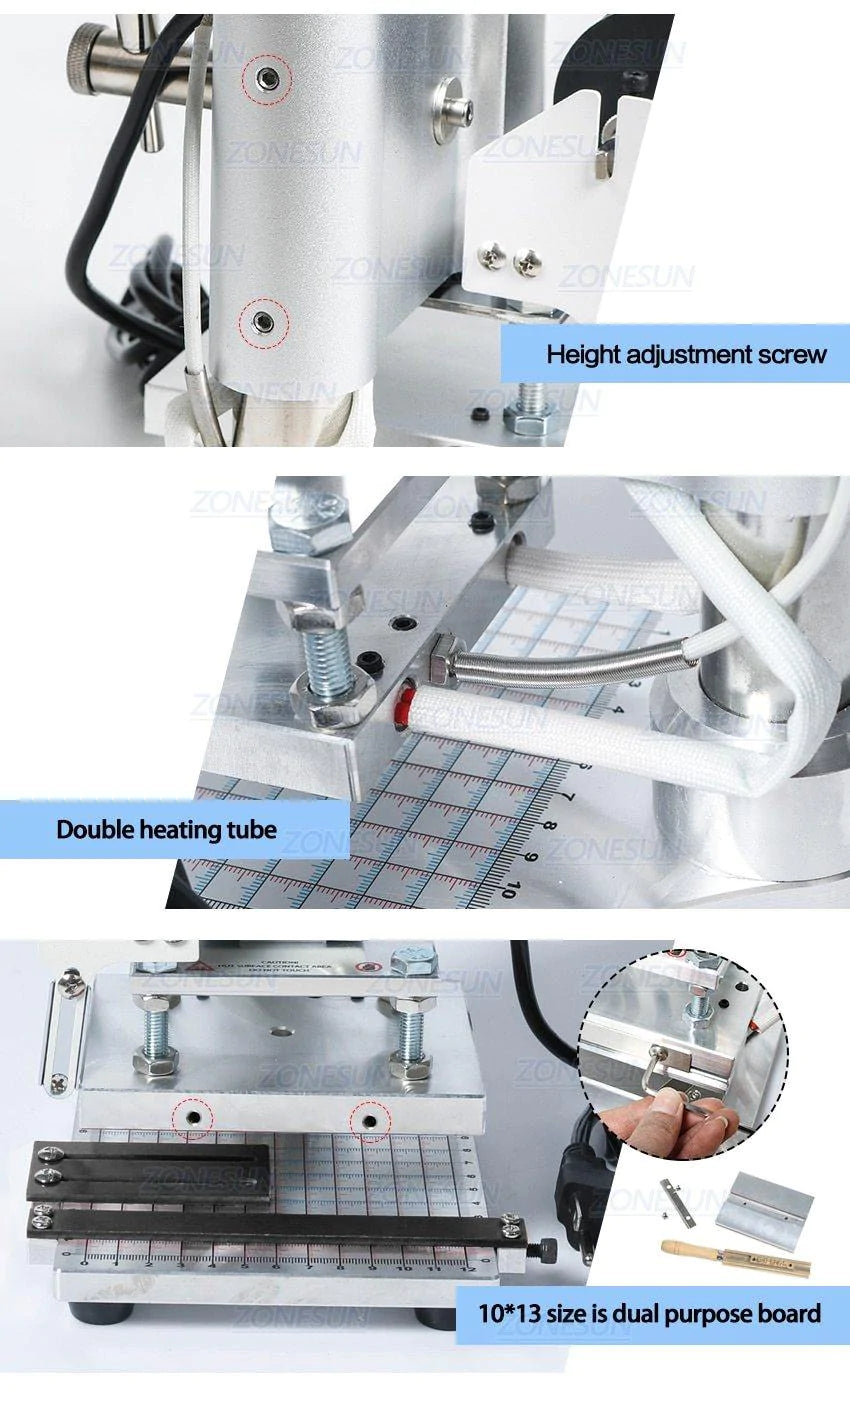 Handy Multifunctional Hot Stamping Press Machine - Buy Confidently with Smart Sales Australia